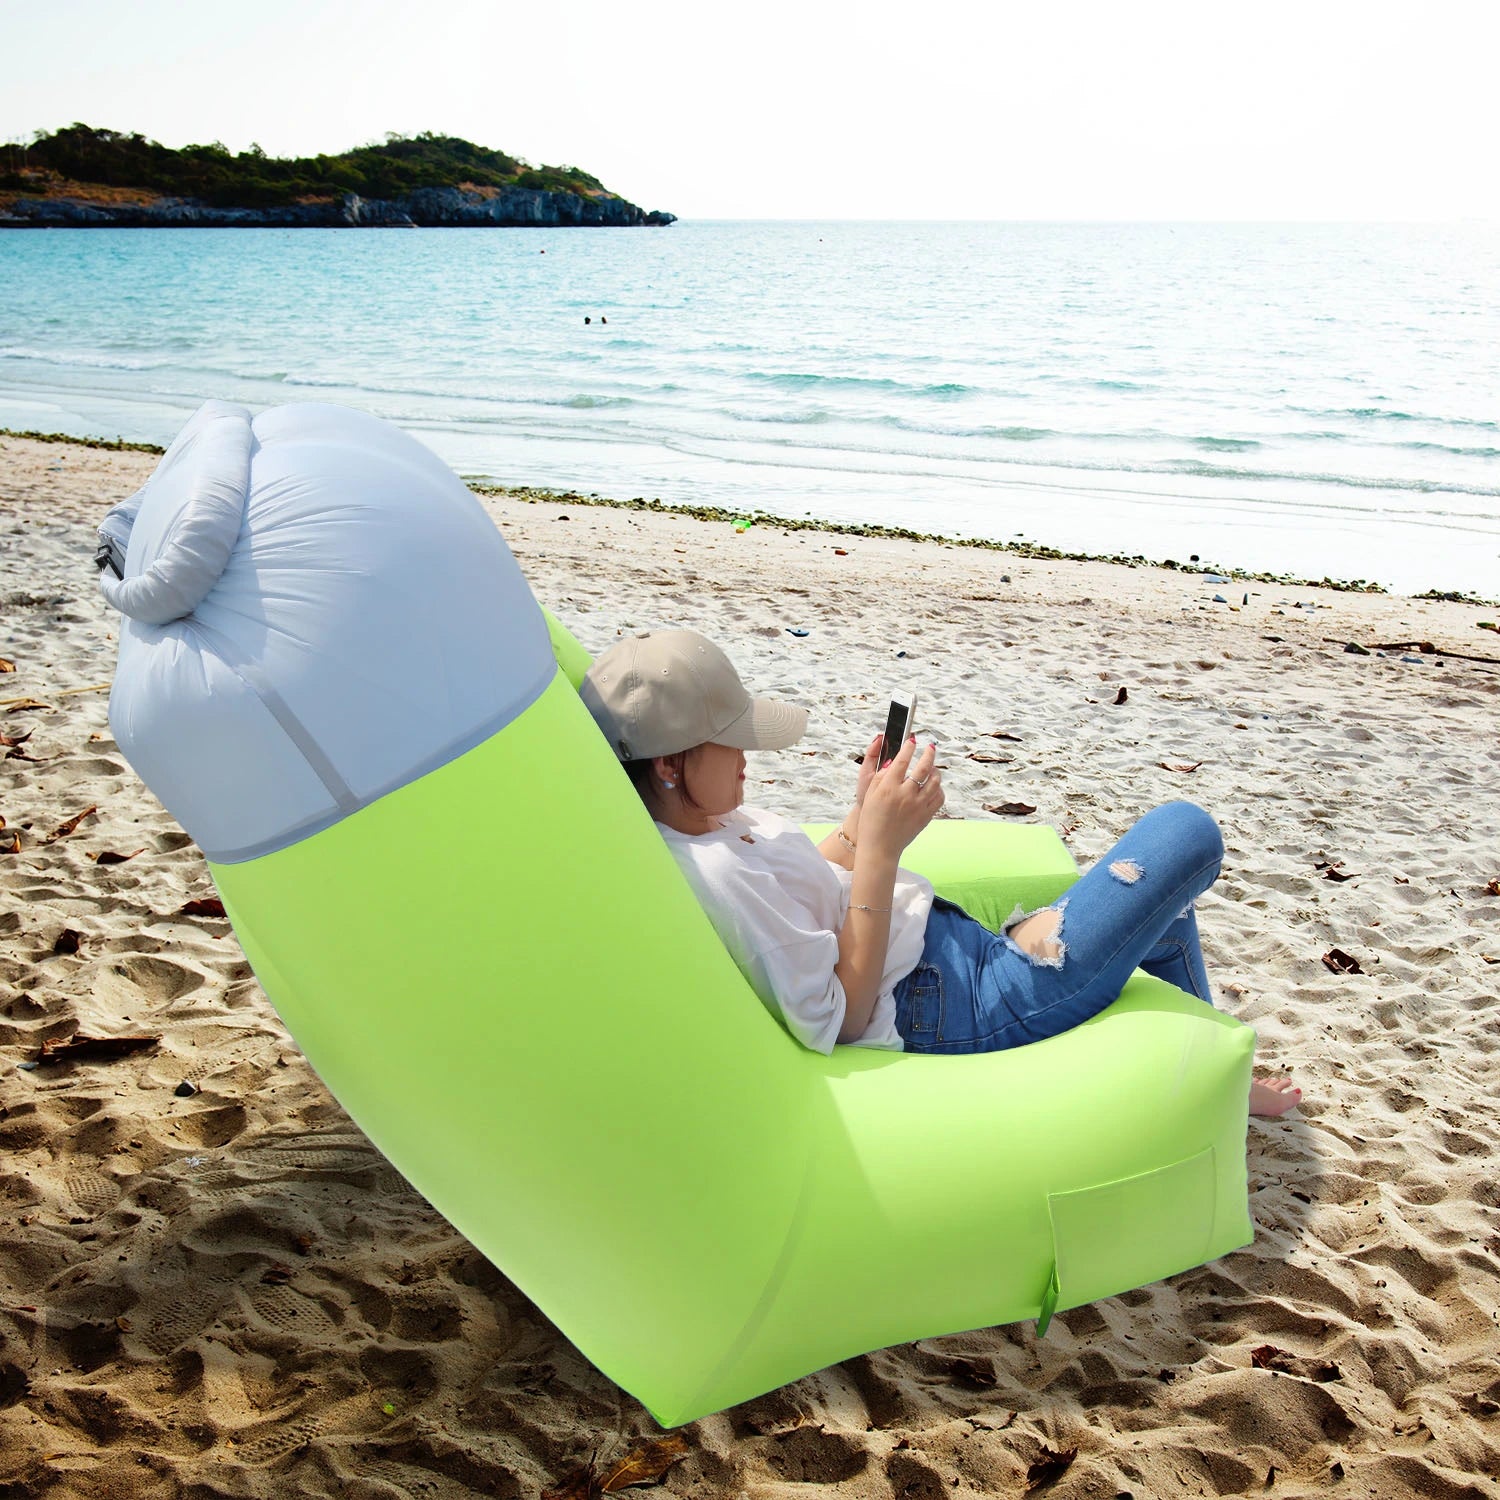 Inflatable Lounger Air Sofa Chair Couch with Portable Organizing Bag - Waterproof Anti Leaking for Backyard Lakeside Beach Traveling Camping Picnics